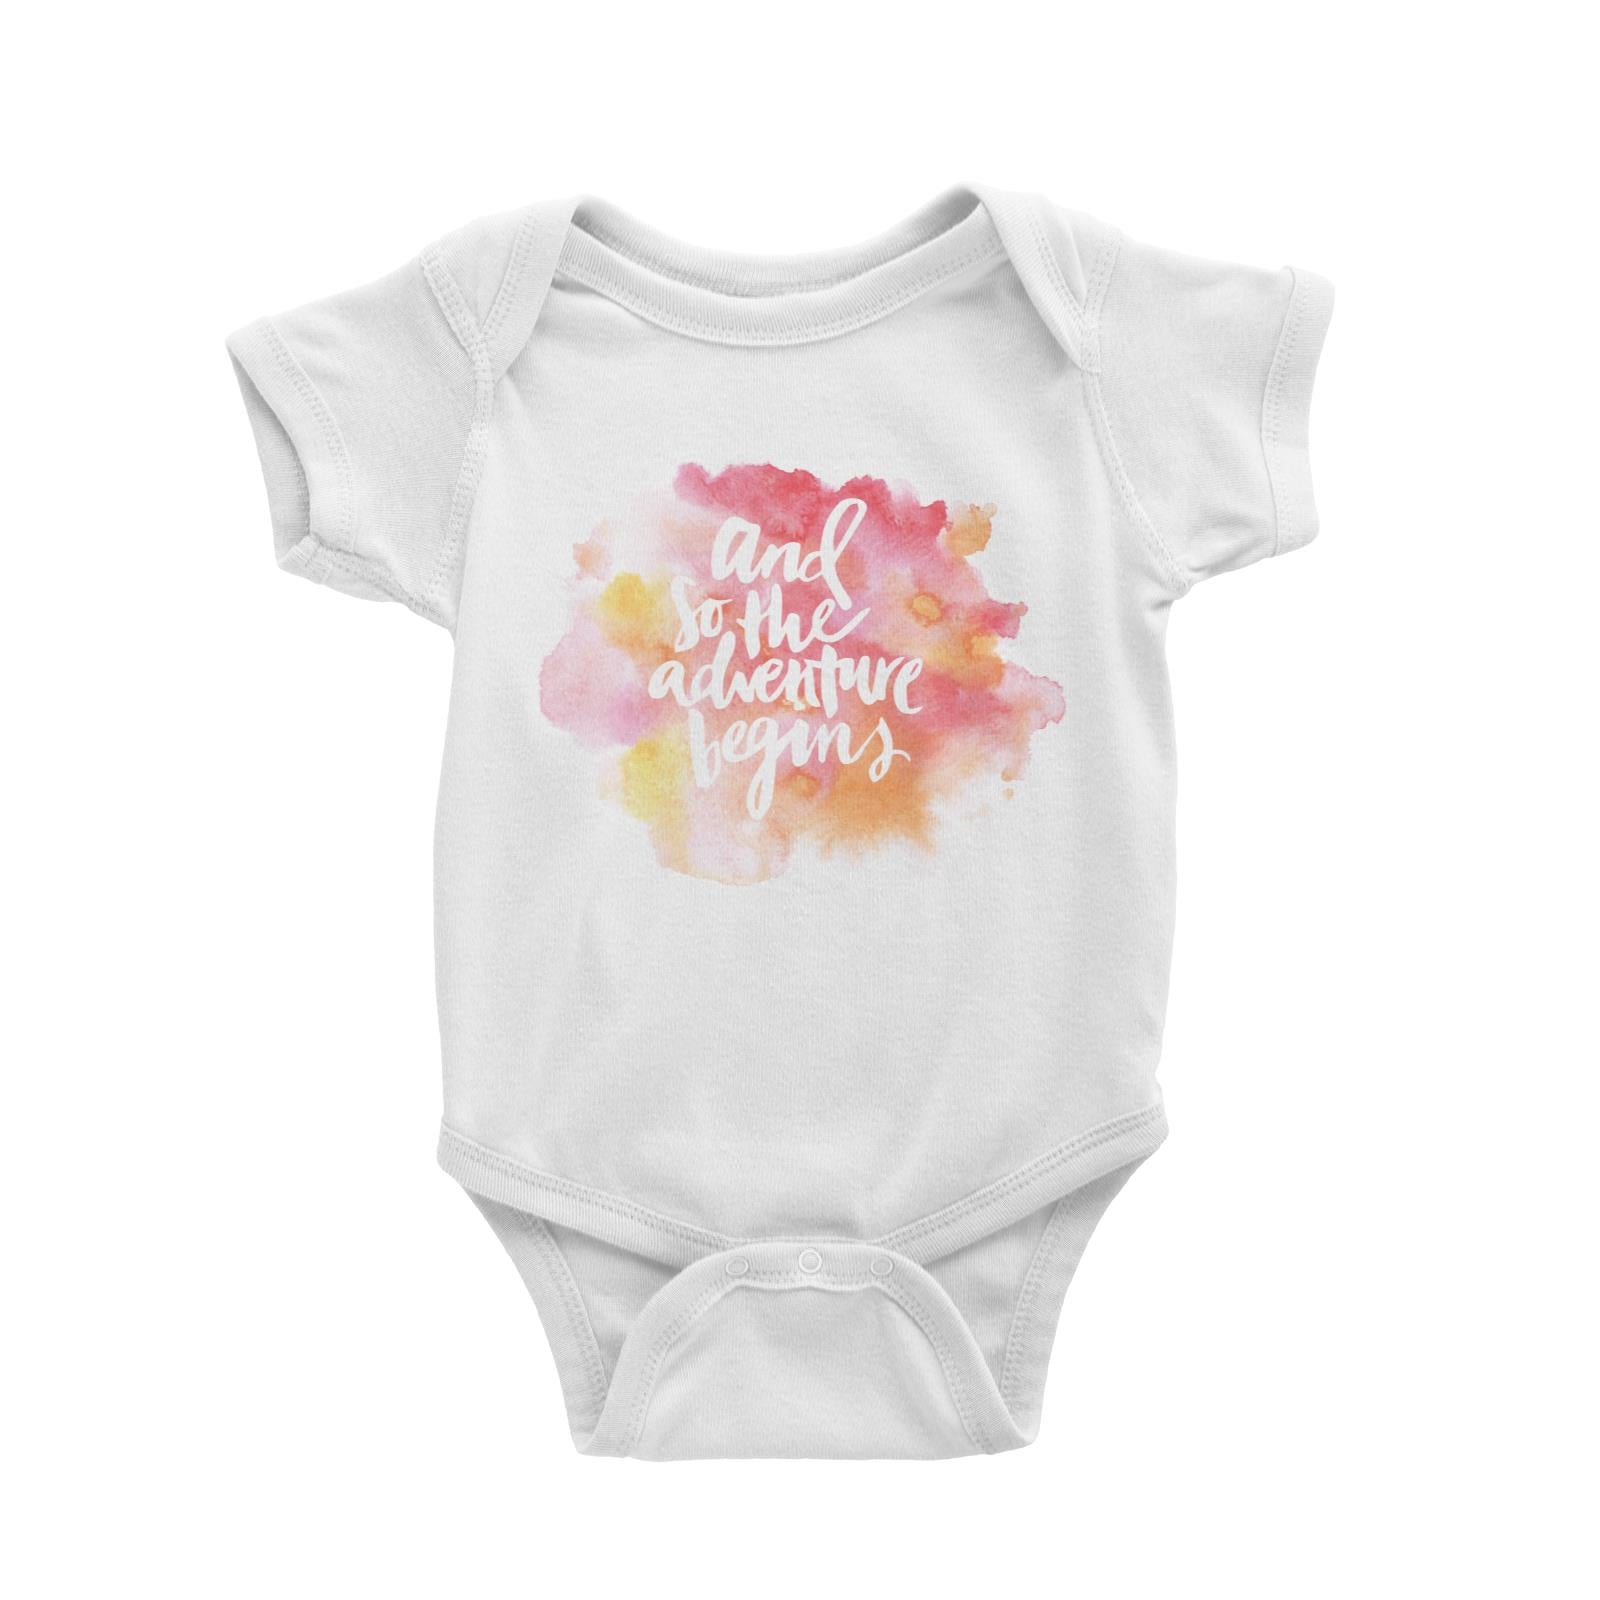 And So The Adventure Begins White Baby Romper